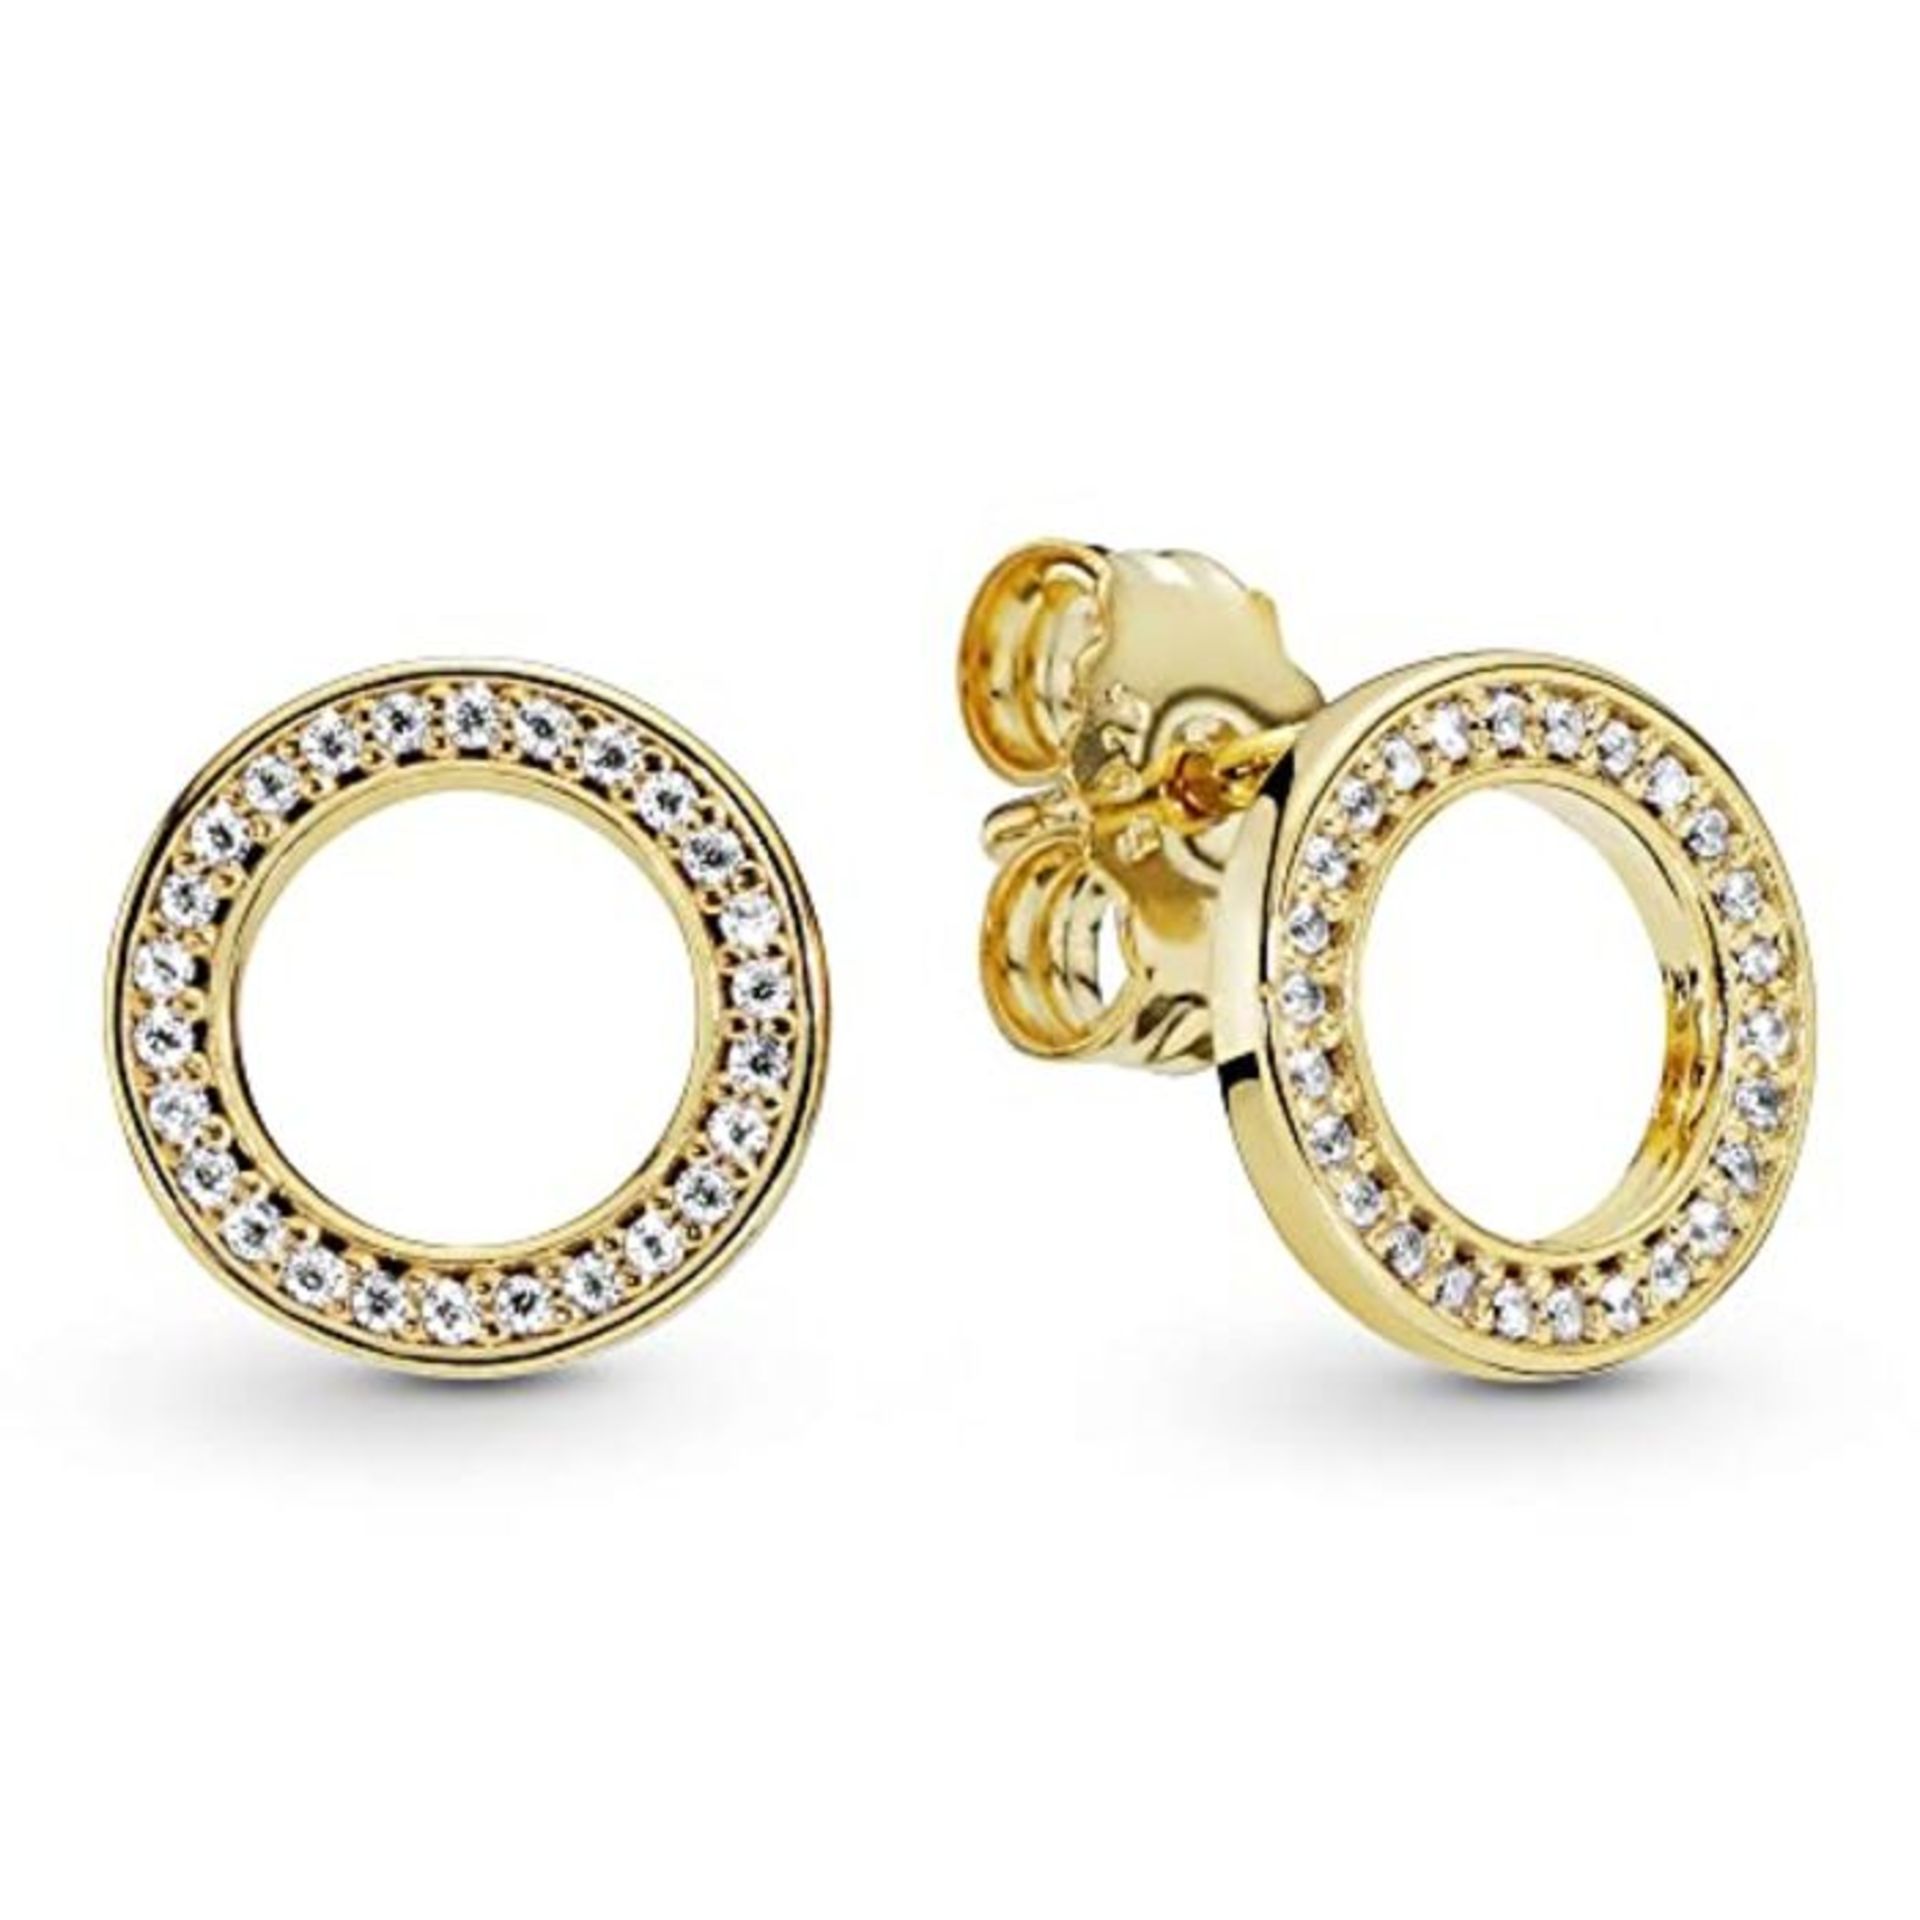 RRP £60.00 Pandora Signature Sparkling Circle Stud Earrings 18K Gold Plated Sterling Silver 1.3x9